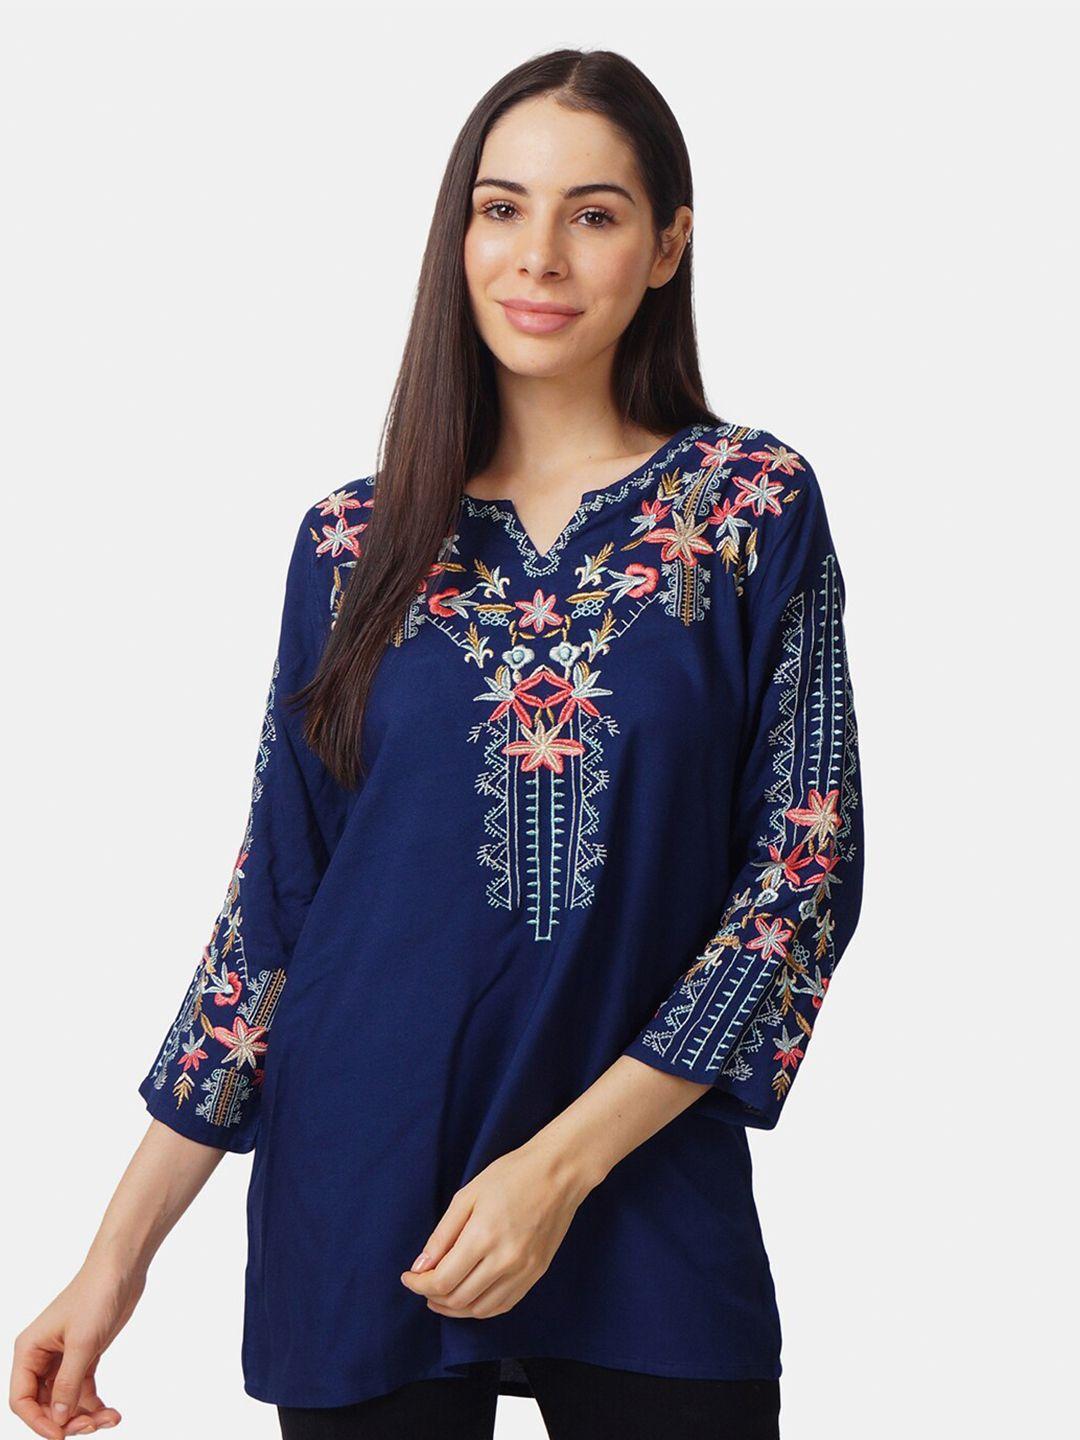 ix impression women navy blue & red floral embroidered a-line top